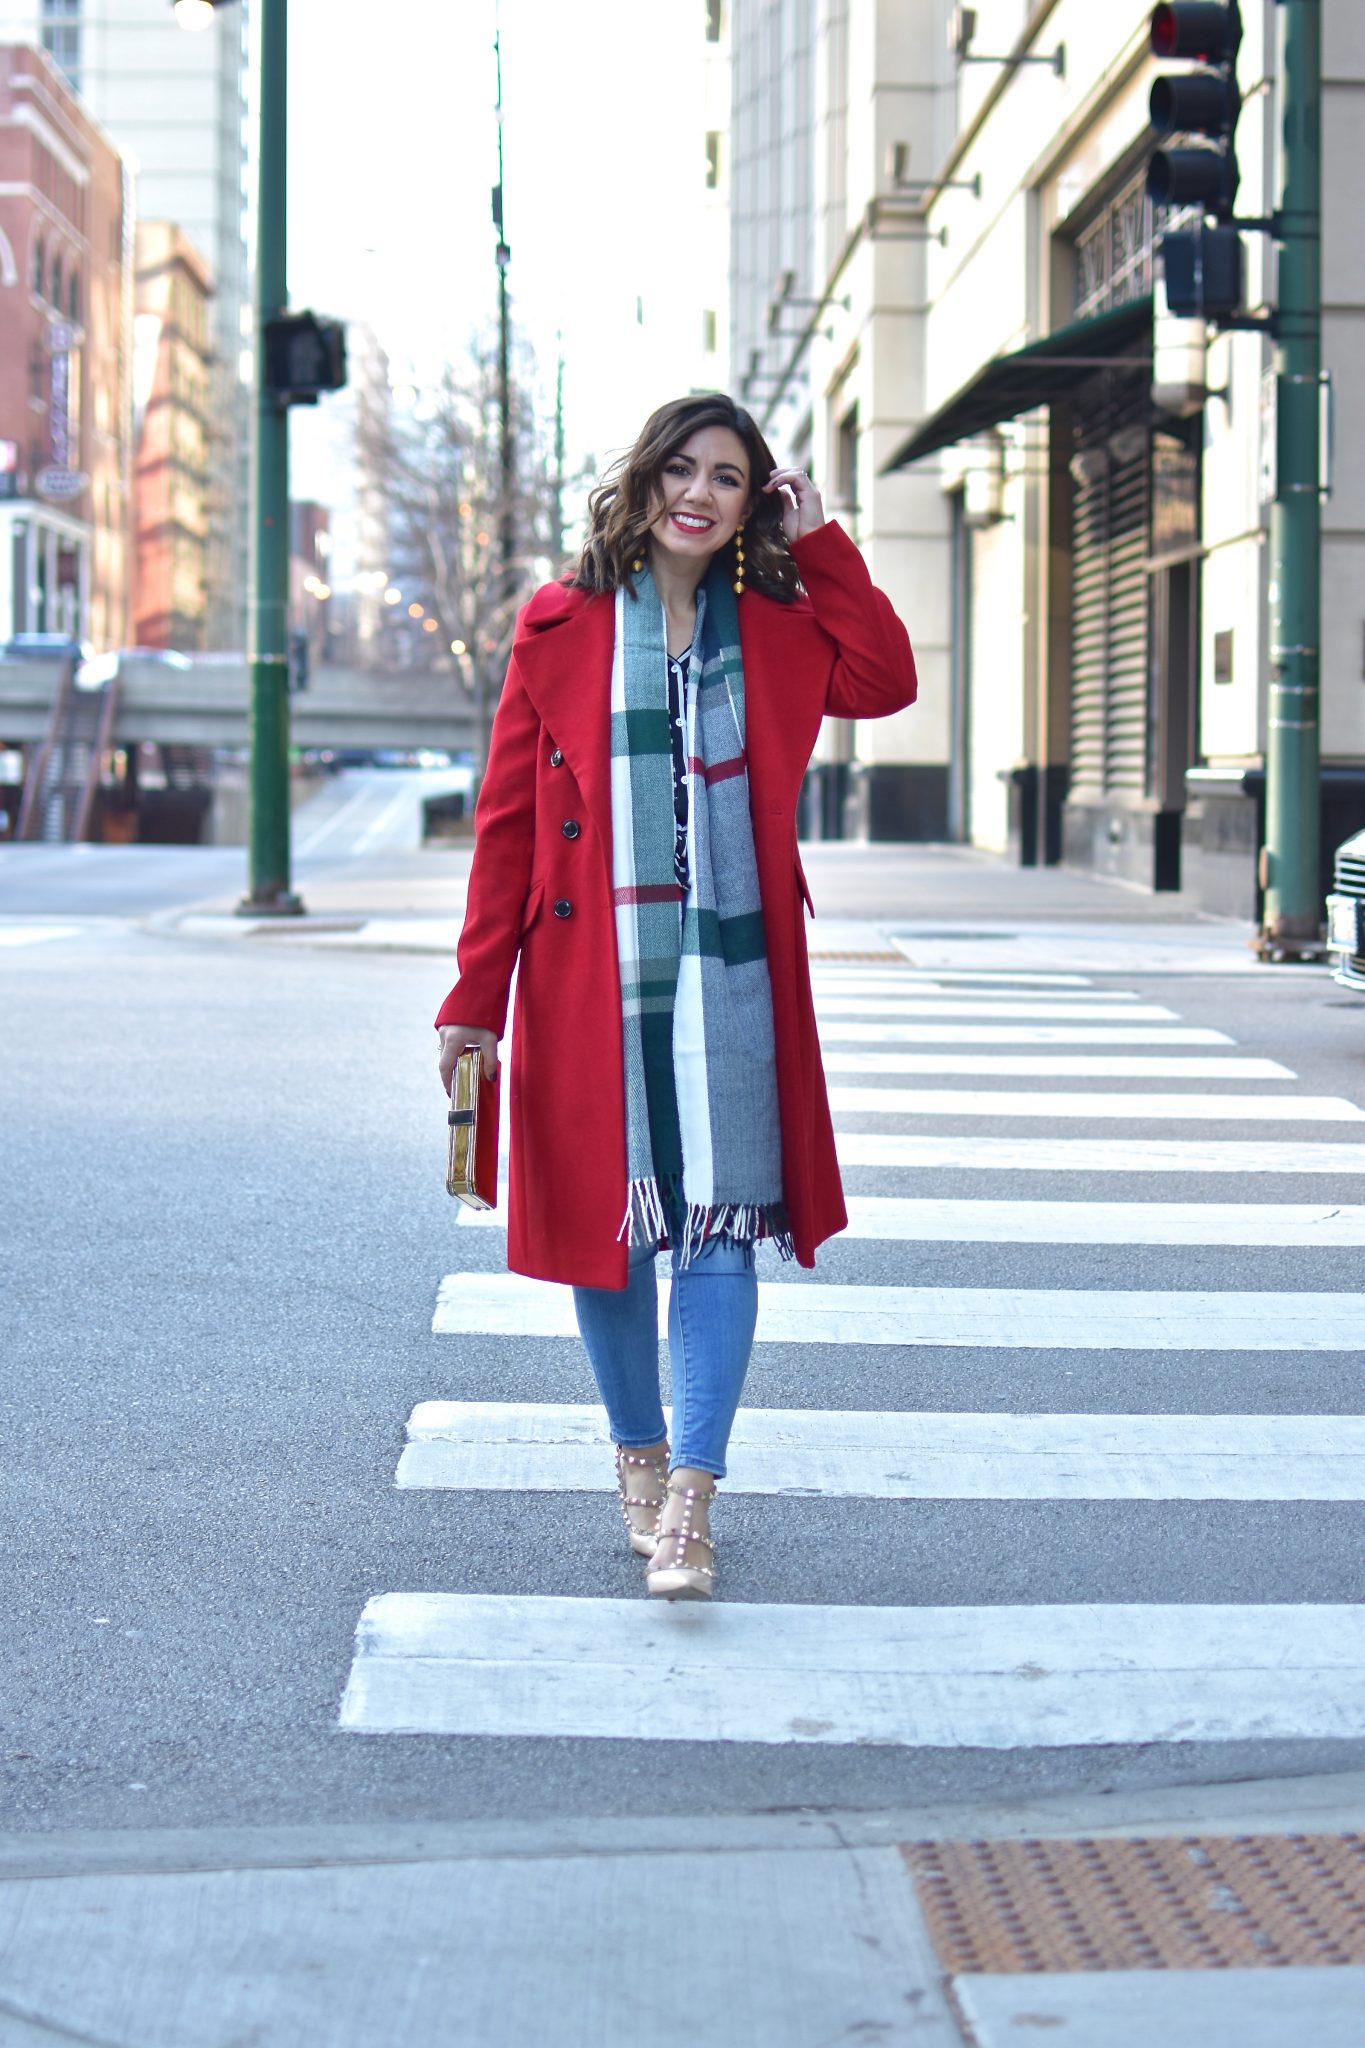 Lifestyle blogger Roxanne of Glass of Glam wearing a red ASOS coat, Valentino rockstud heels, a plaid scarf, and Madewell denim | What Being Jewish at Christmas is Like featured by top Chicago lifestyle blogger, Glass of Glam